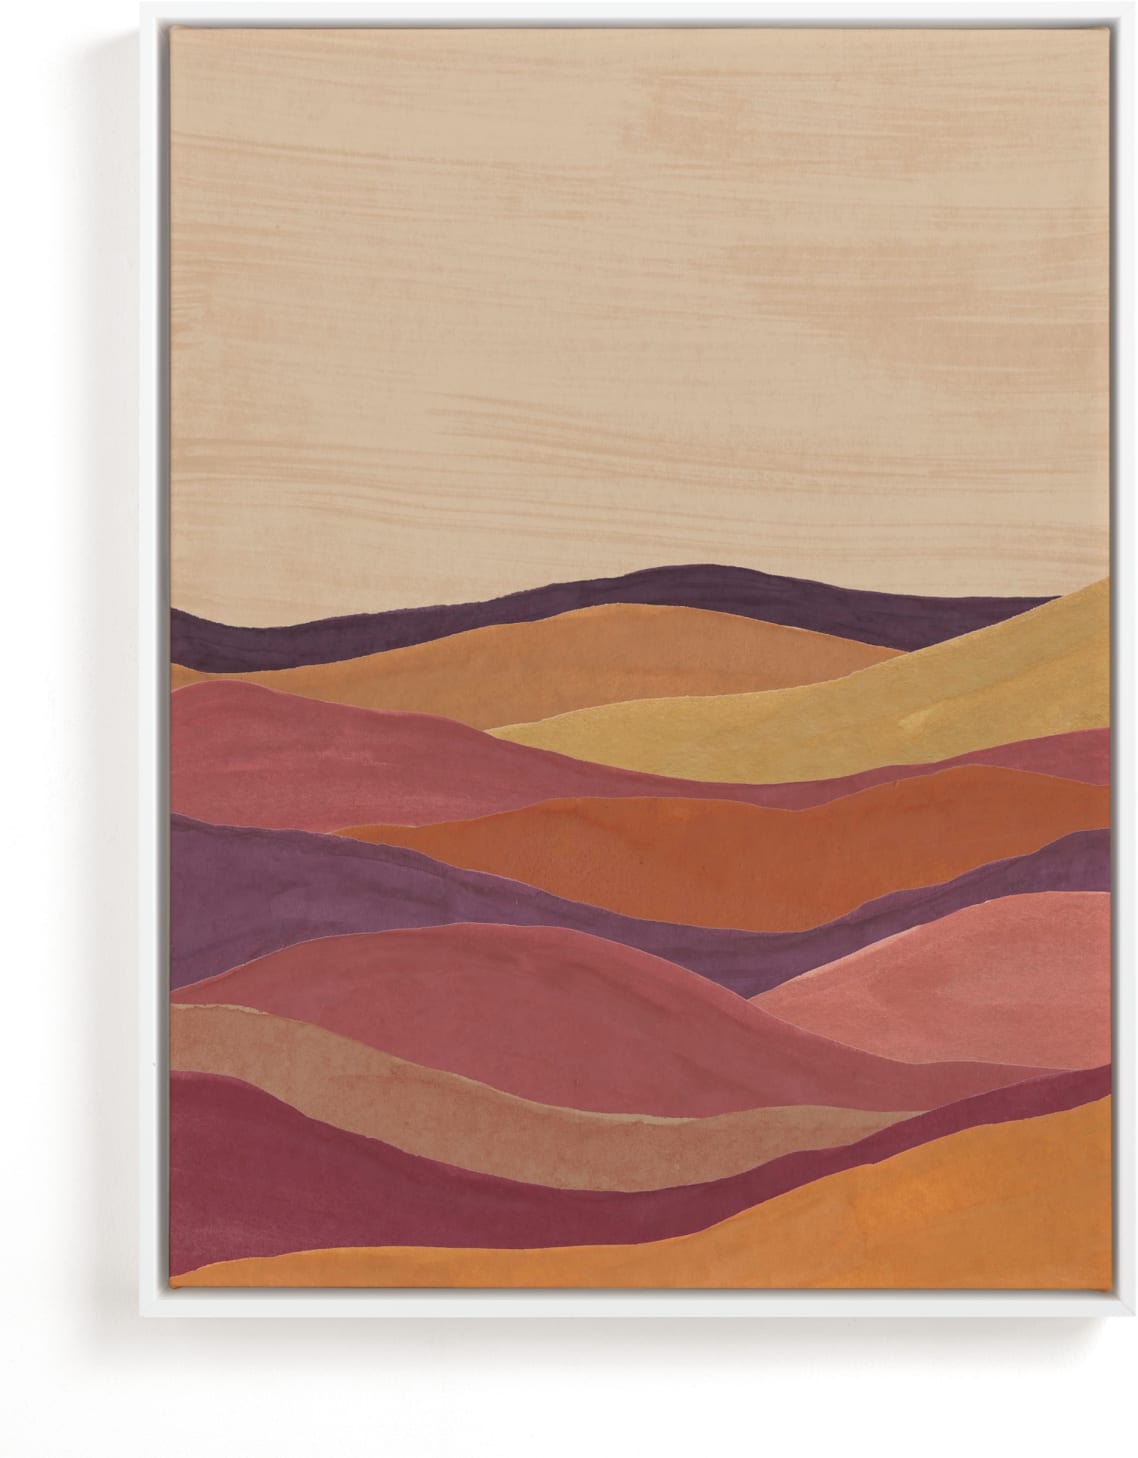 This is a purple art by Annie Shapiro called Desert layers.